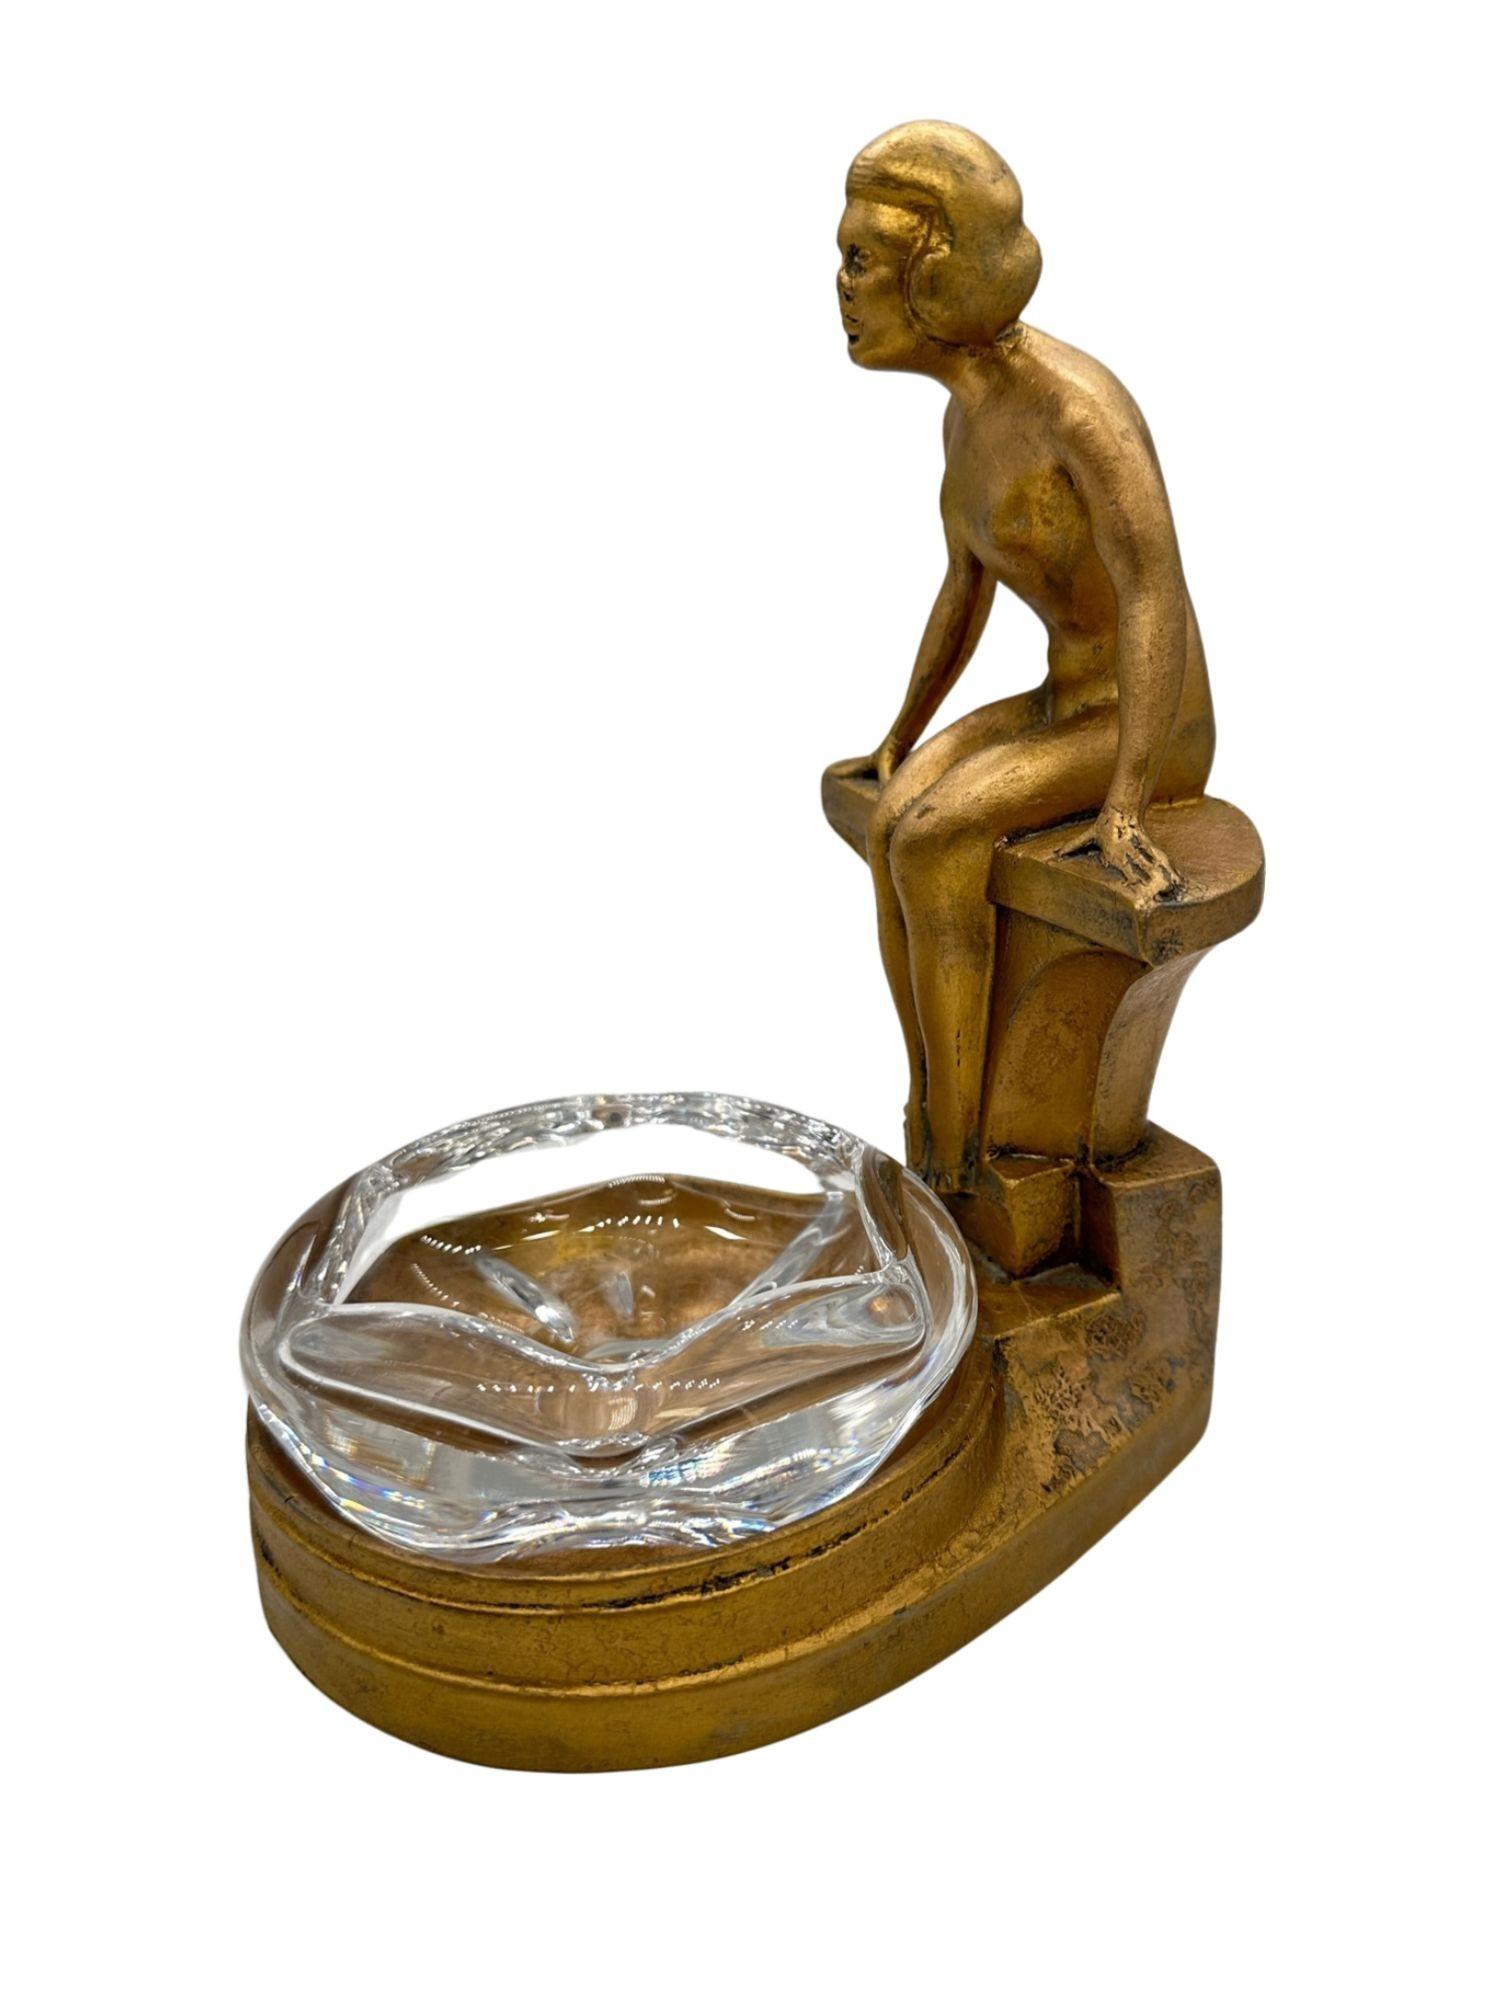 A Stunning Art Deco figural female nude gracefully sitting by a pool with a crystal glass ashtray by NuArt Creations. This spelter metal sculptural featuring an elegant bronze finish and prominently displays the 'NuArt Creations' emblem at the